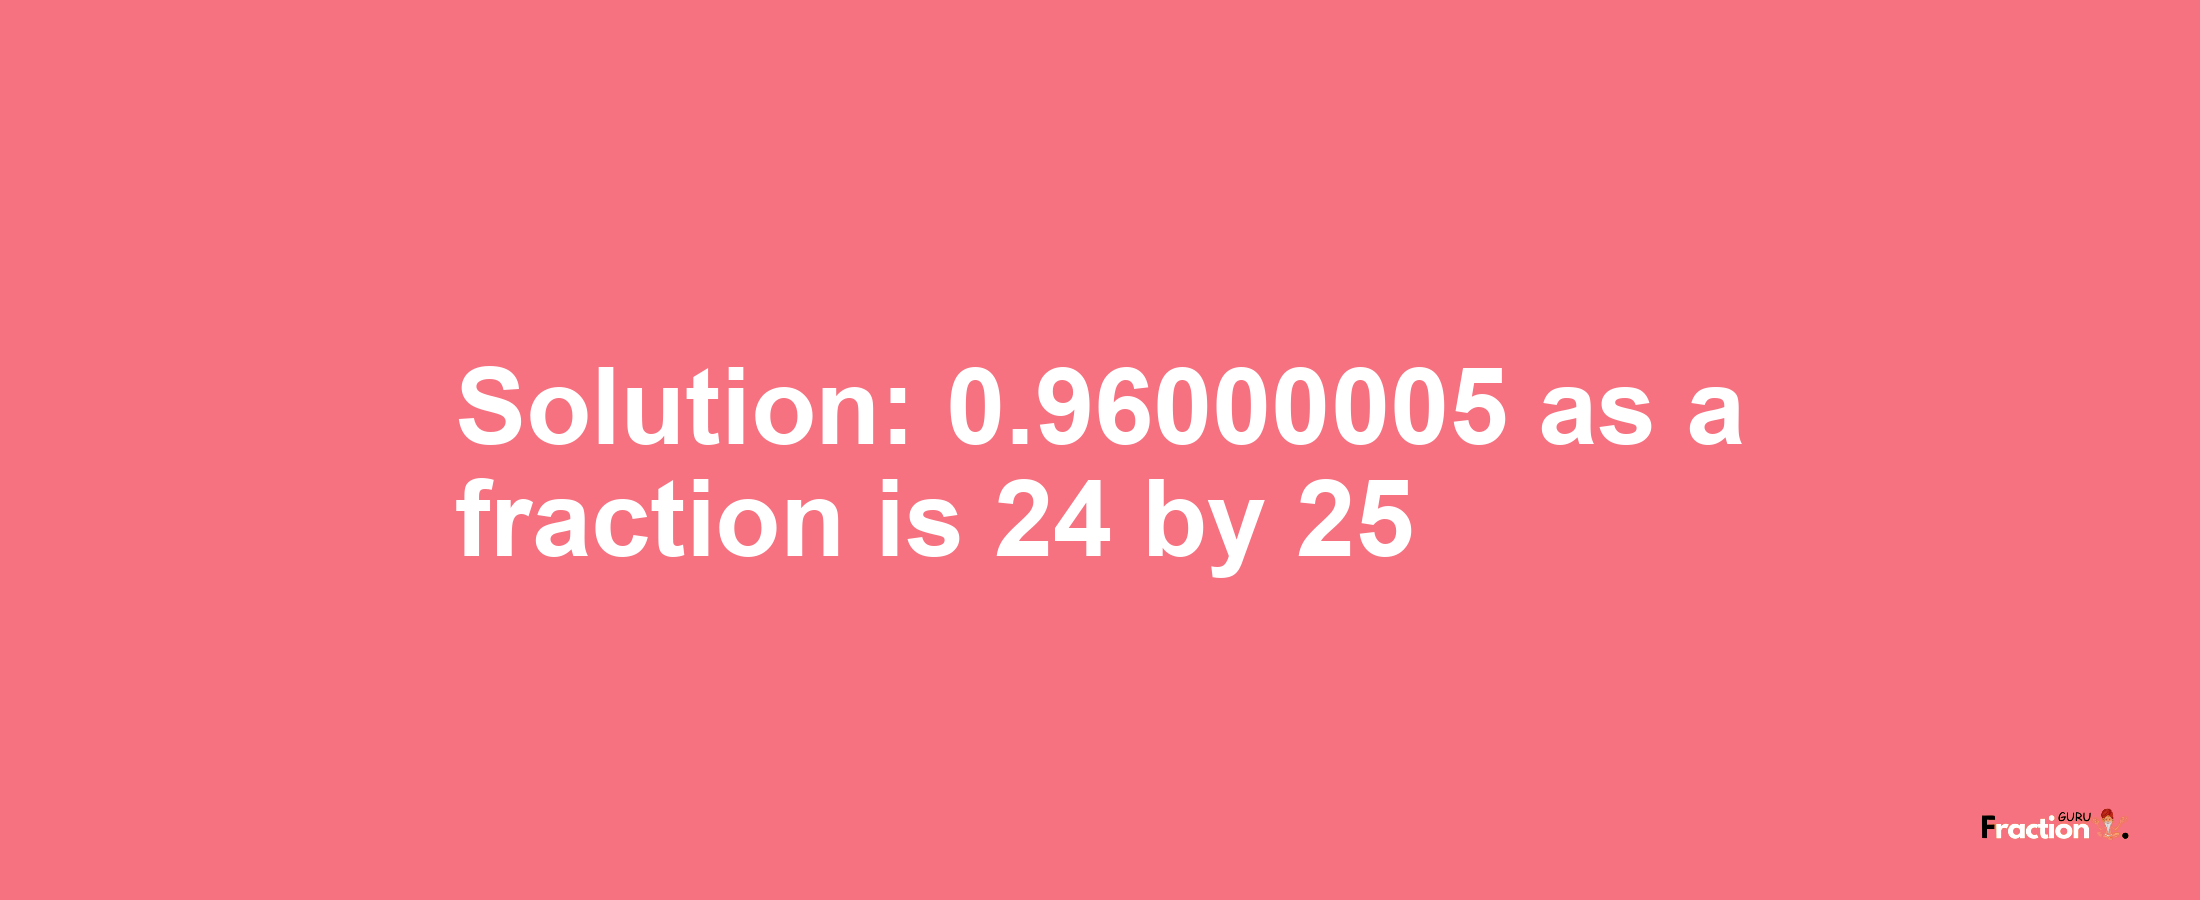 Solution:0.96000005 as a fraction is 24/25